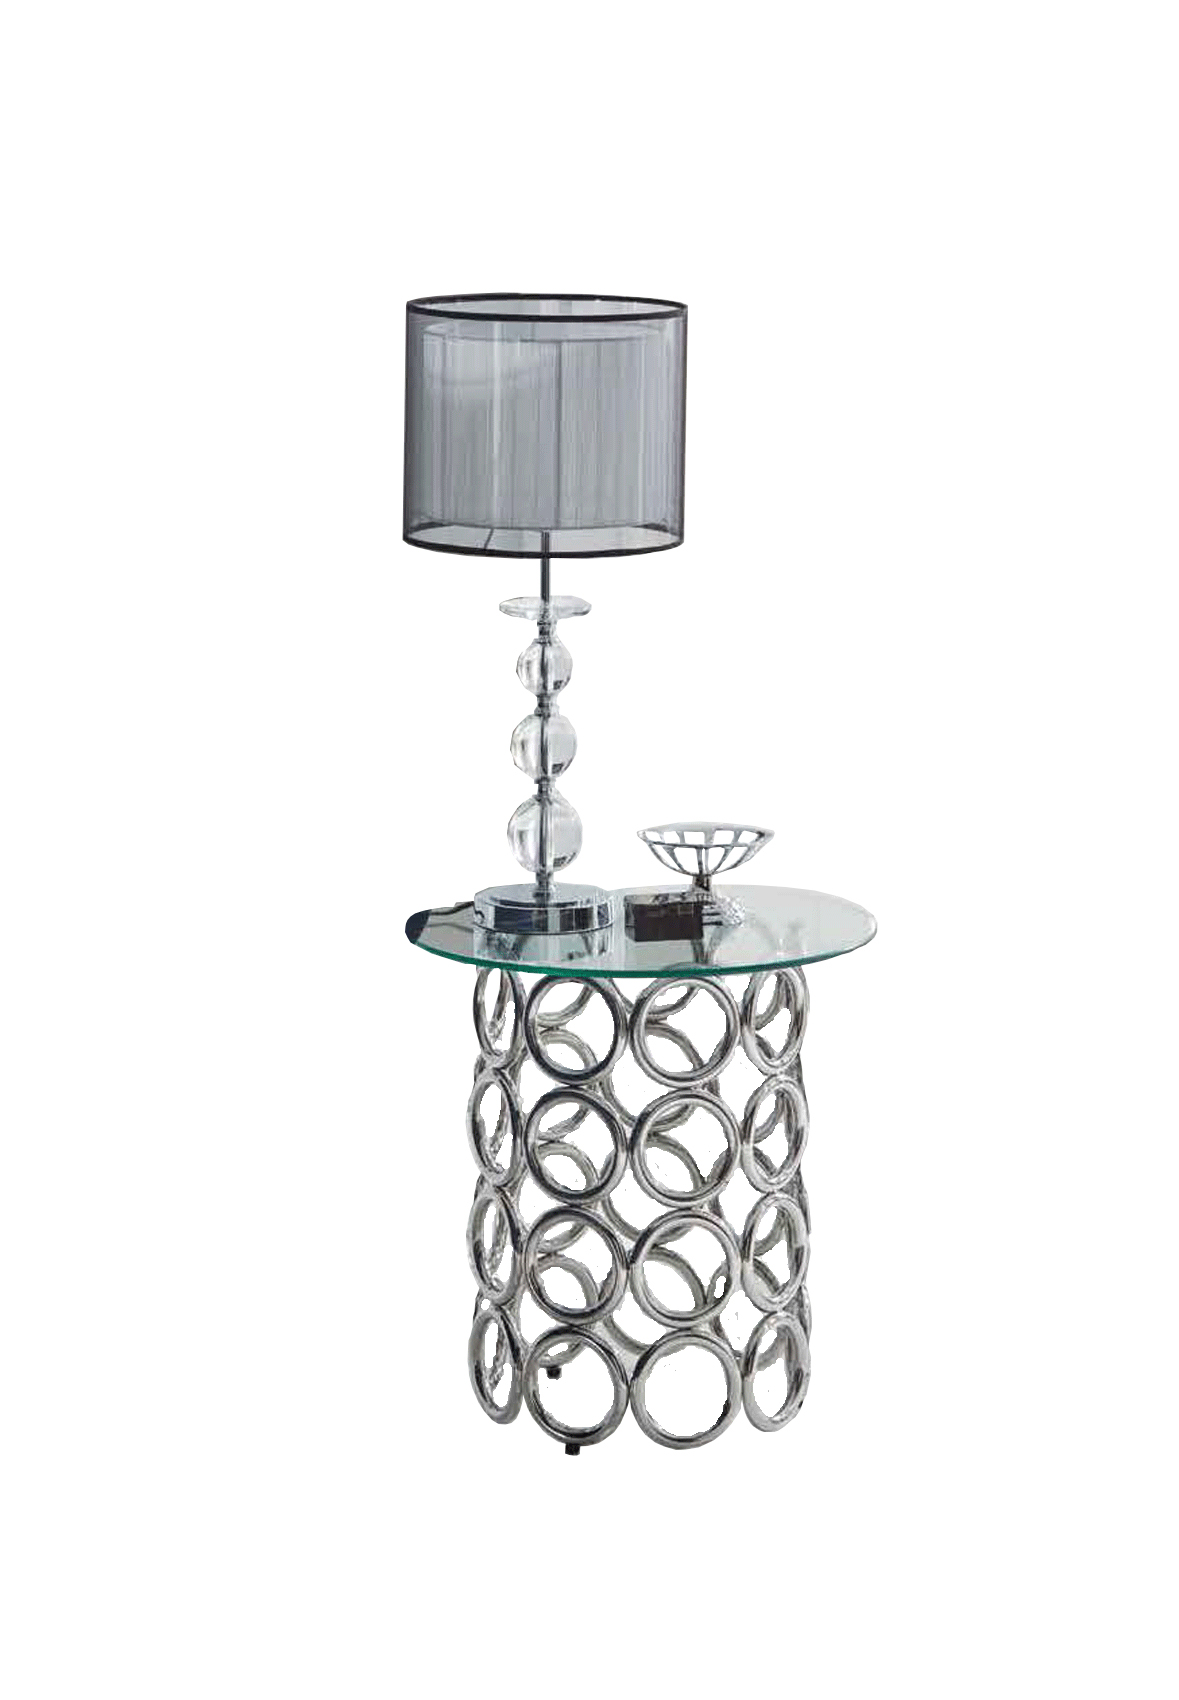 Living Room Furniture Coffee and End Tables CT-233 Coffee table, TO-9123 Lamp Table